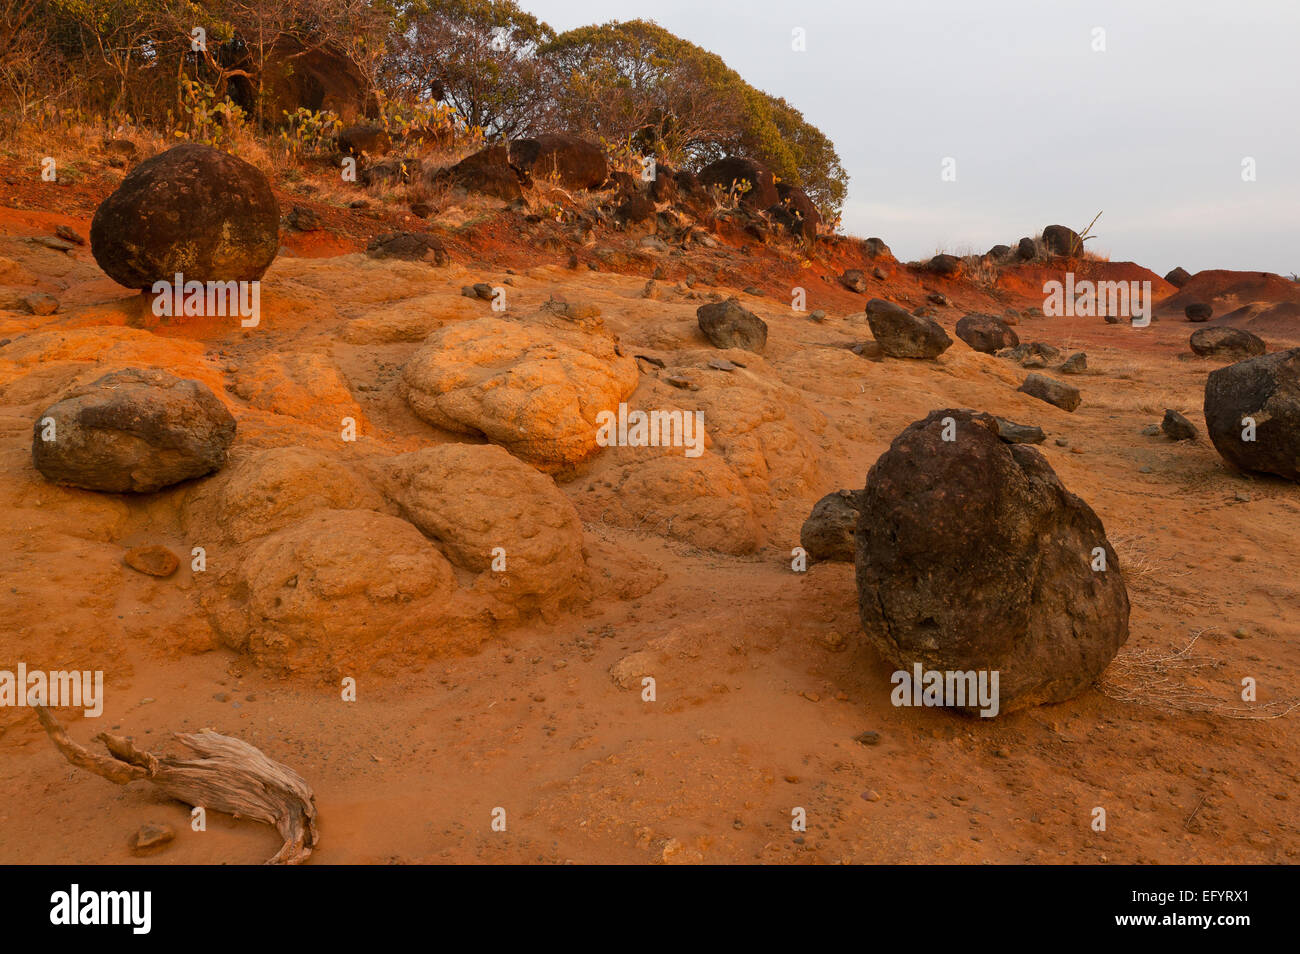 Panama landscape with eroded soil and volcanic boulders in the desert of Sarigua national park, Herrera province, Republic of Panama, Central America Stock Photo